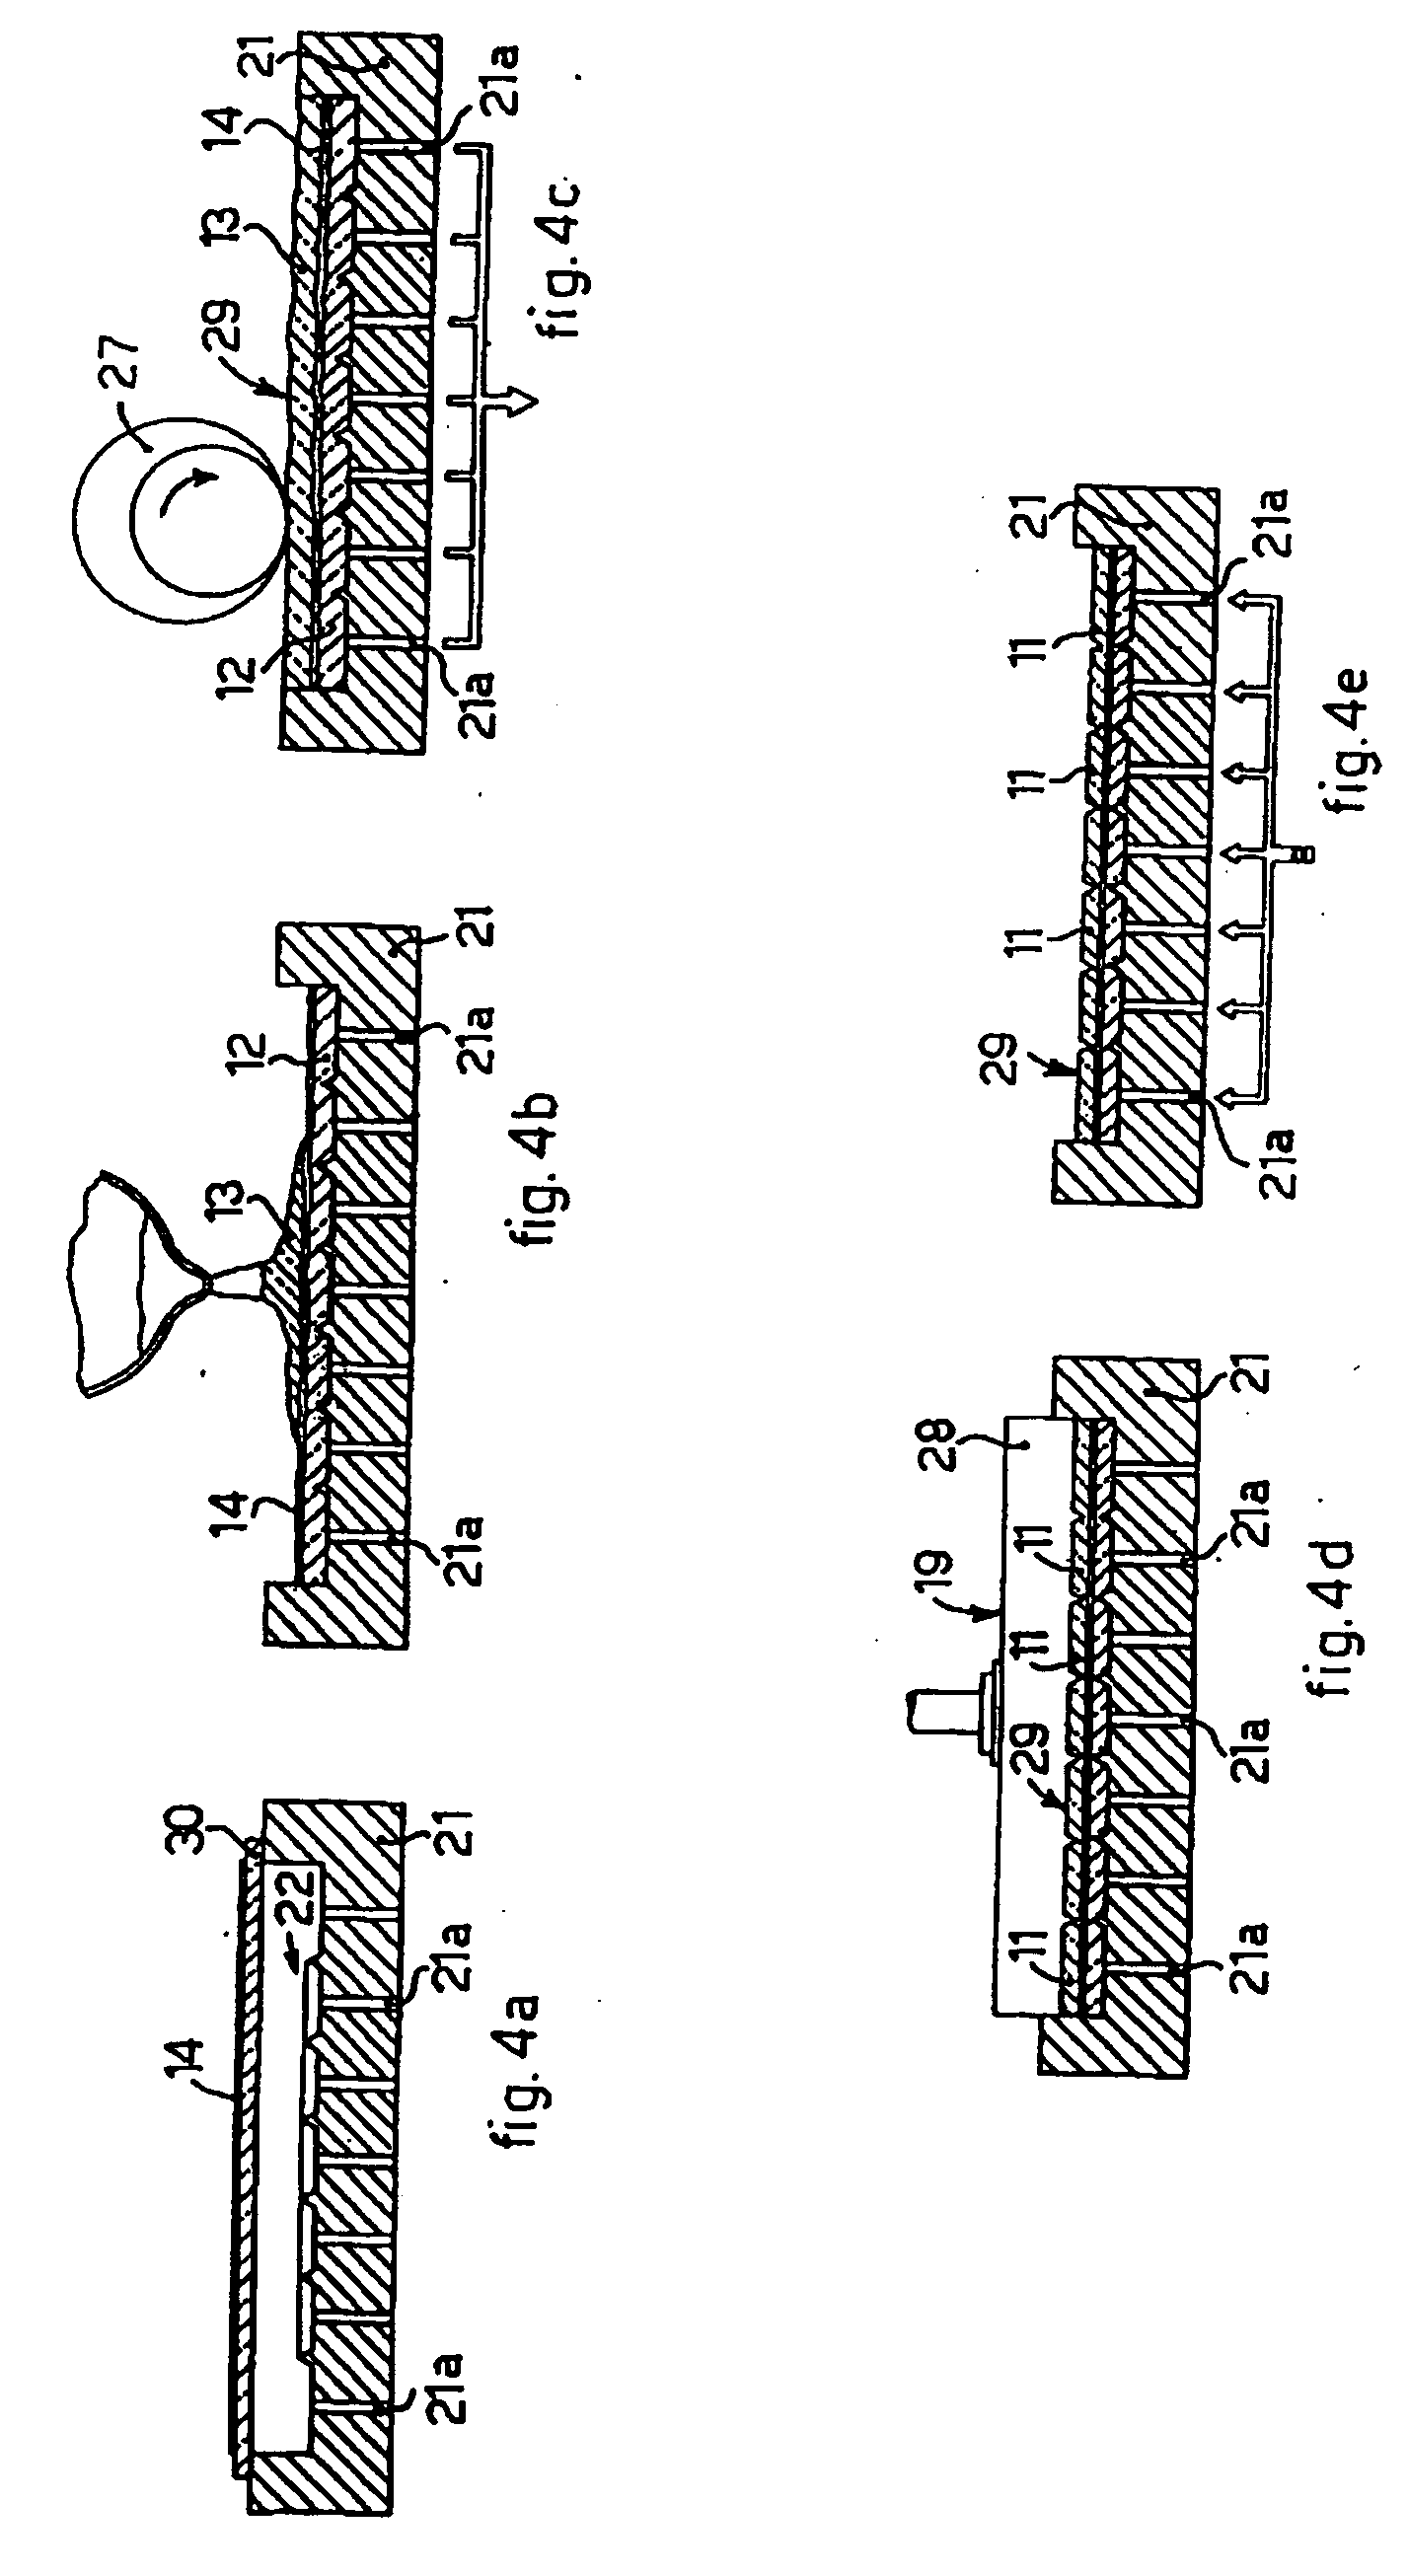 Method to produce tesserae of glass mosaic containing a metal foil